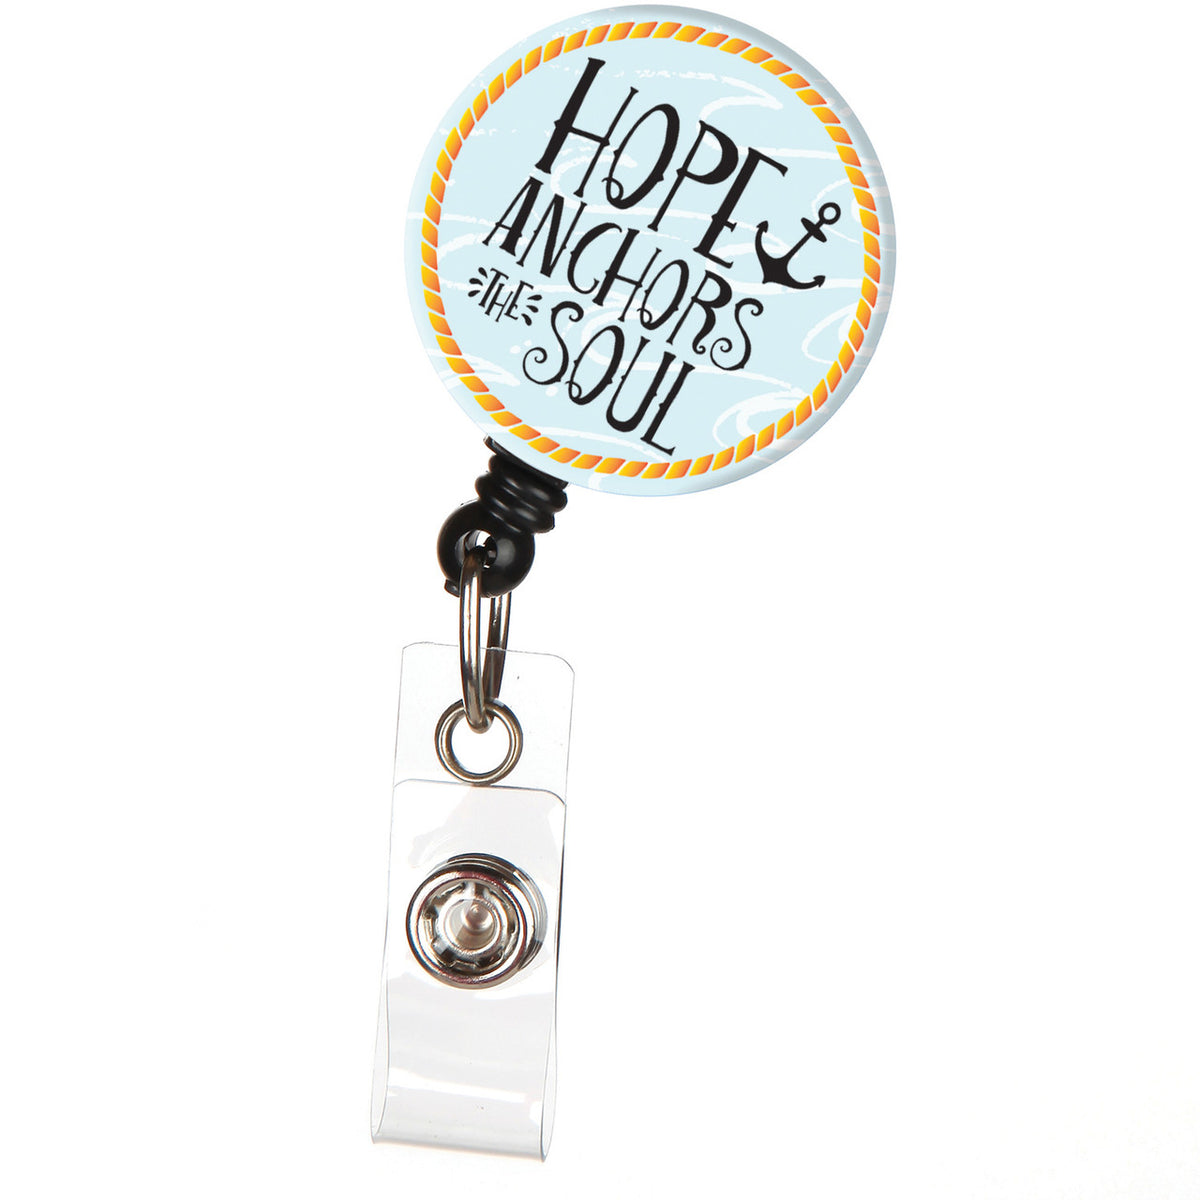 Hope Anchors the Soul Retractable Badge Reel